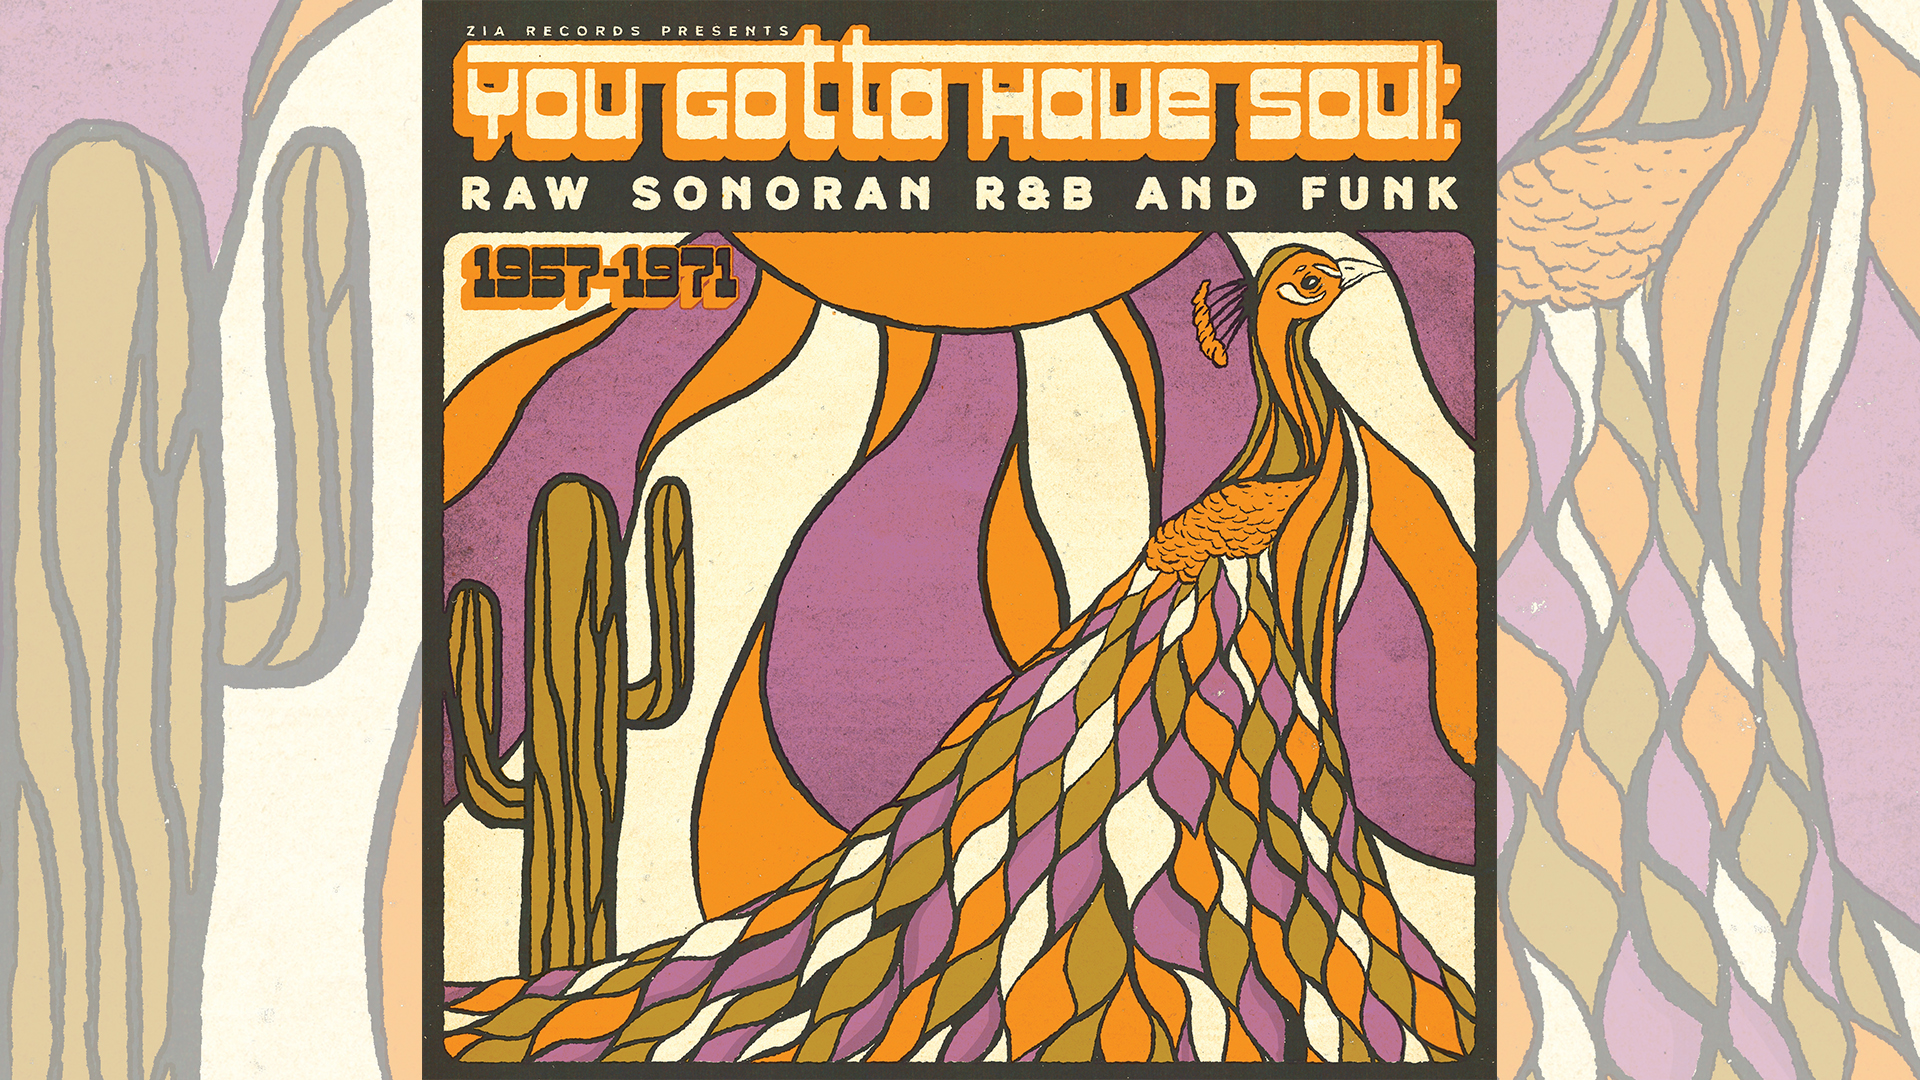 featured image:You Gotta Have Soul: Raw Sonoran R & B and Funk